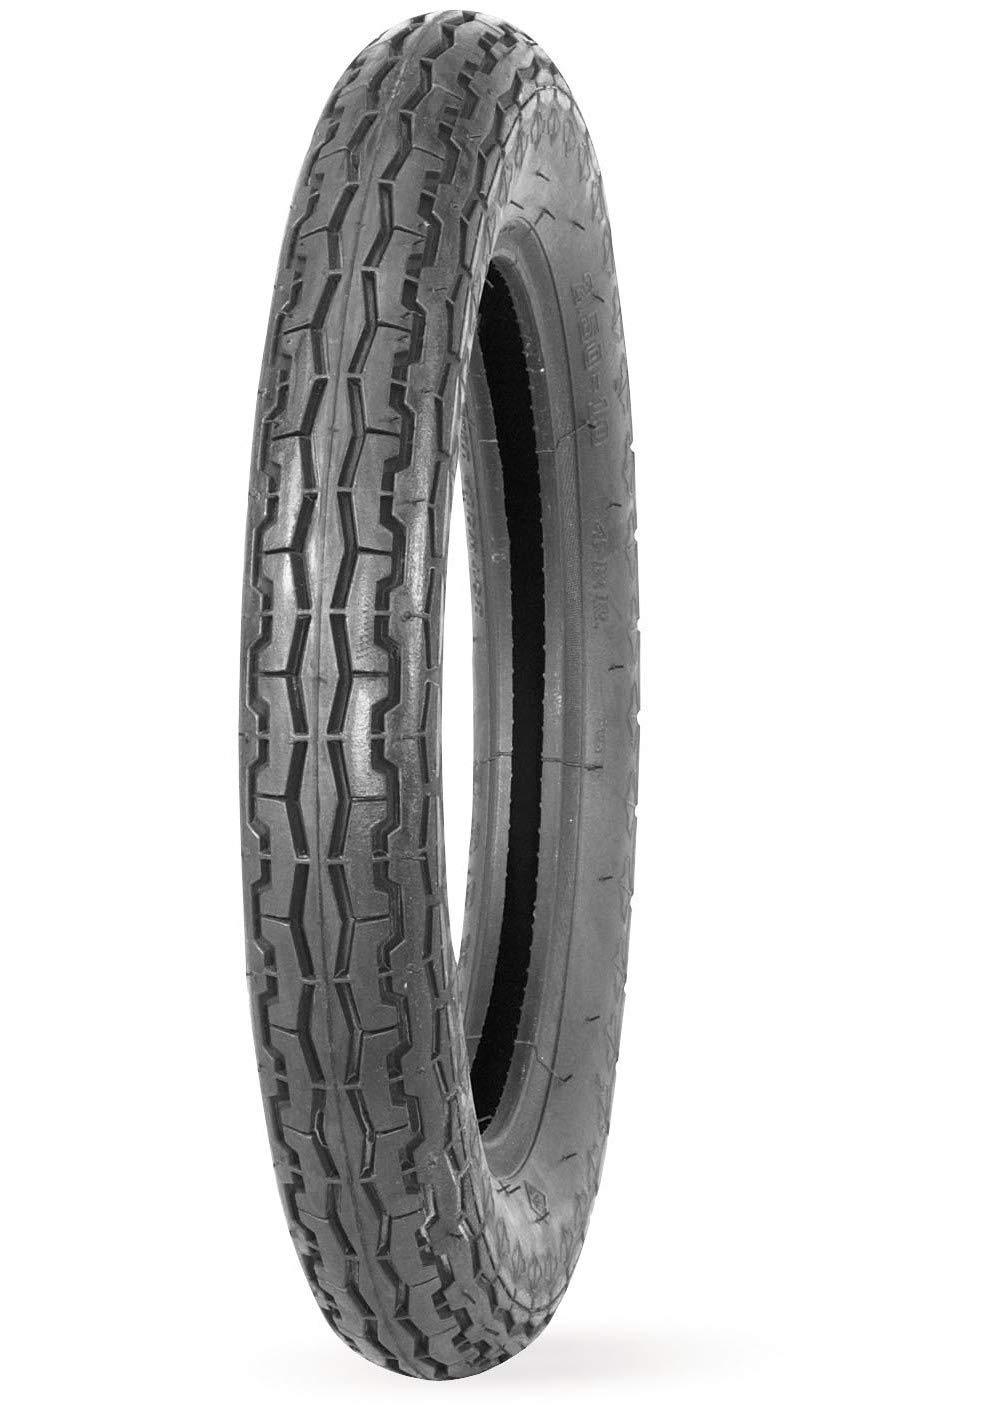 IRC MB8 2.50-10 4 Ply Scooter - Moped Tire